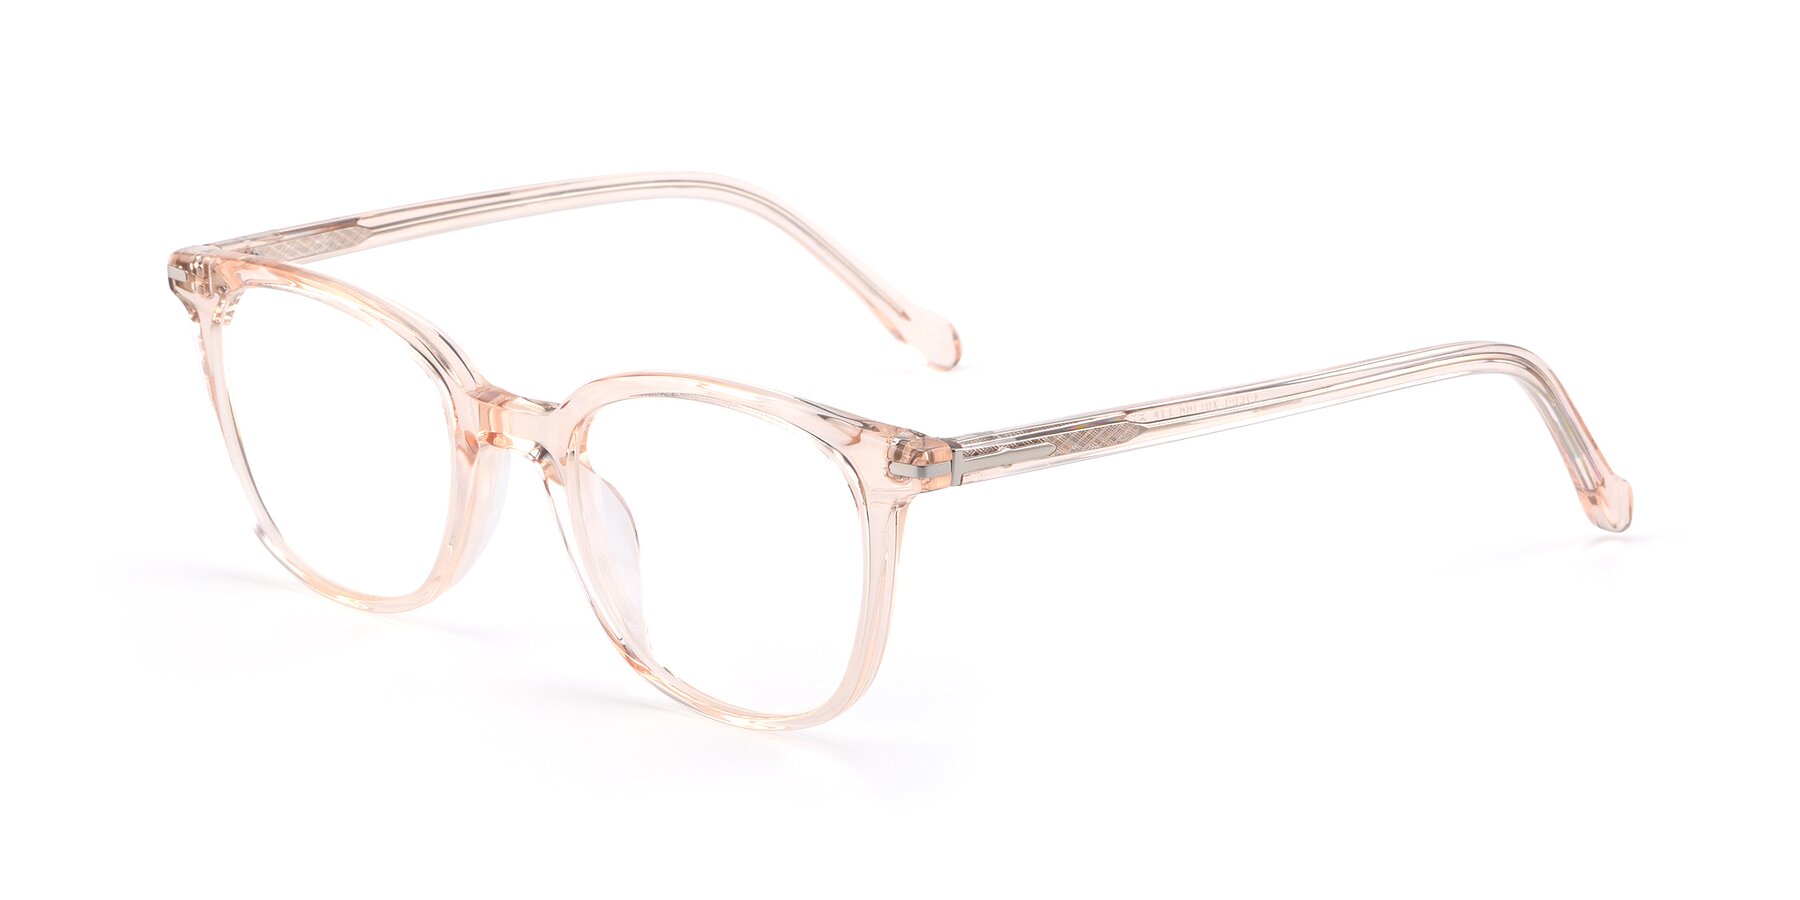 Angle of 17562 in Transparent Pink with Clear Eyeglass Lenses